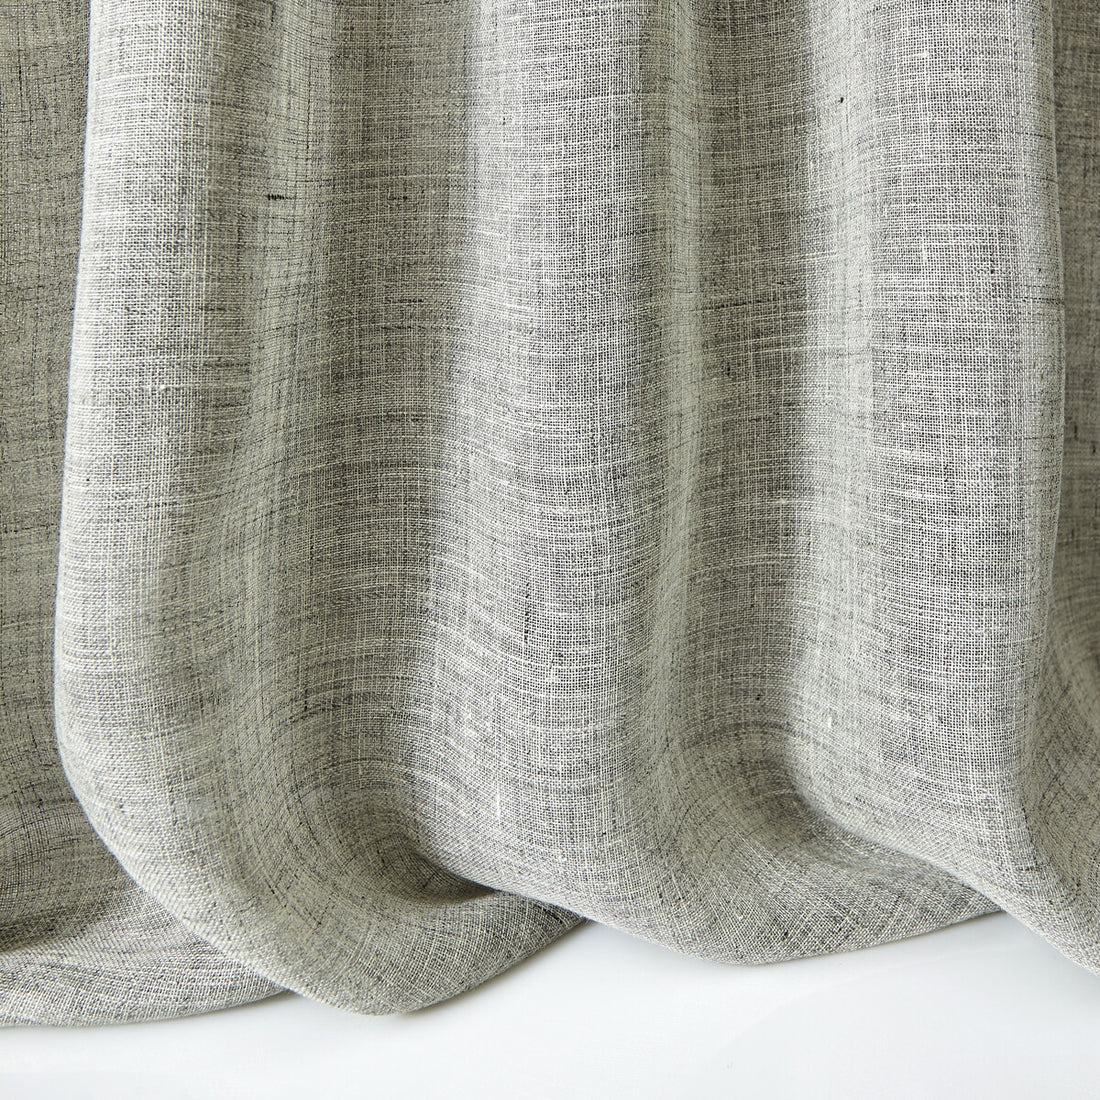 Menes fabric in 9 color - pattern LZ-30198.09.0 - by Kravet Design in the Lizzo collection